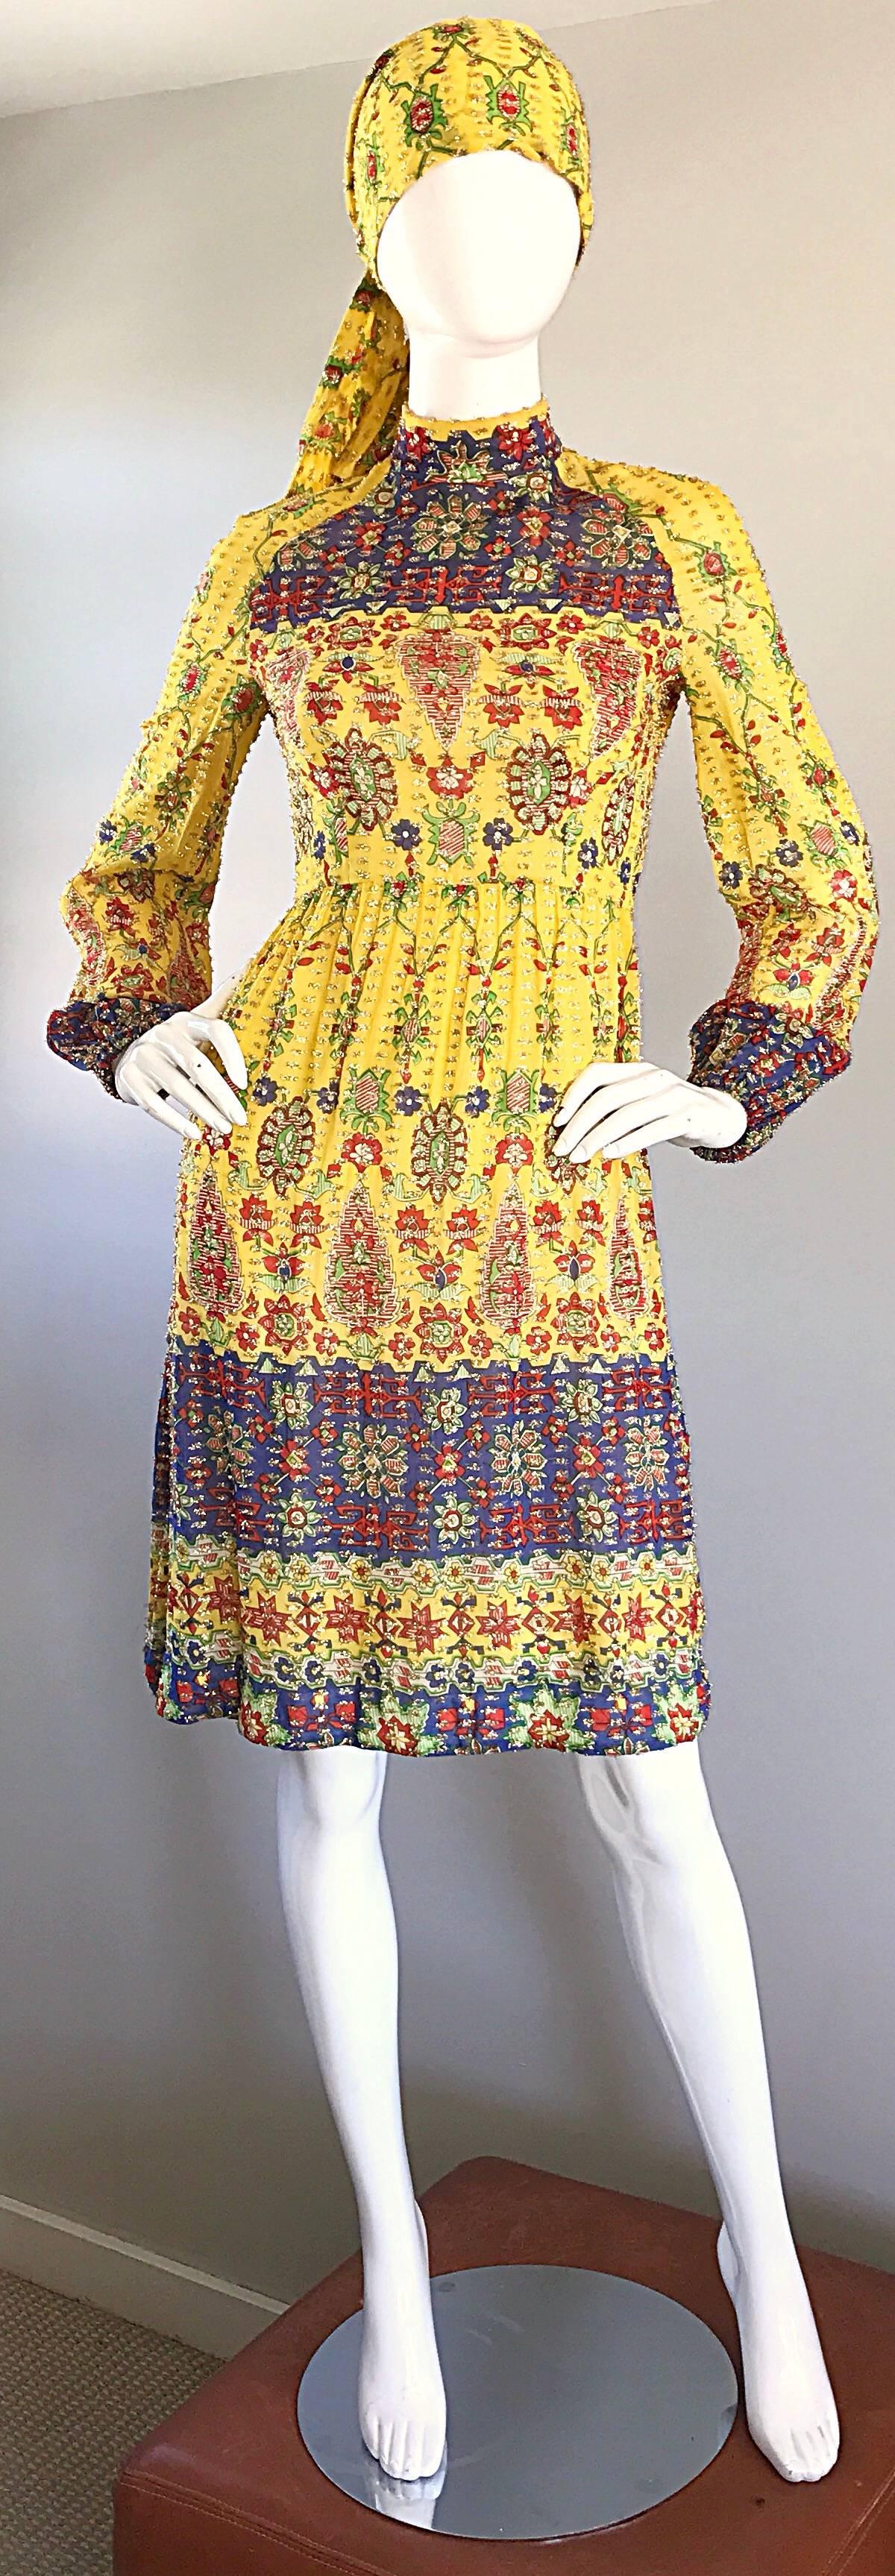 Fantastic early 1970s RODRIGUES silk chiffon hand painted Watercolor boho dress! Features incredible abstract prints in vibrant blue, red, and green with gold silk threading throughout. Flattering tailored bodice with a high neck. Included matching